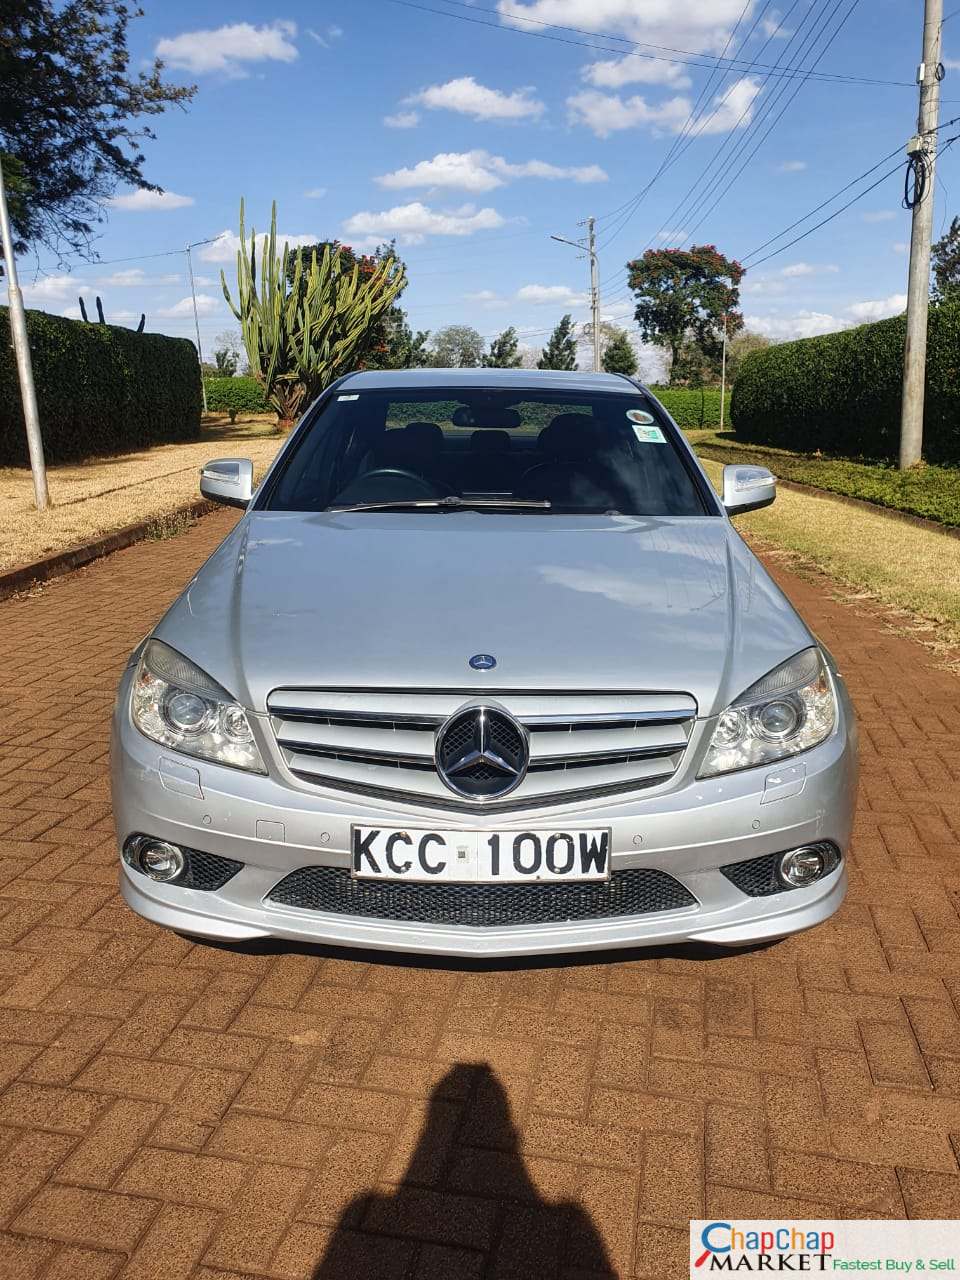 Mercedes Benz C200 🔥 You Pay 30% DEPOSIT 70% installments Trade in OK